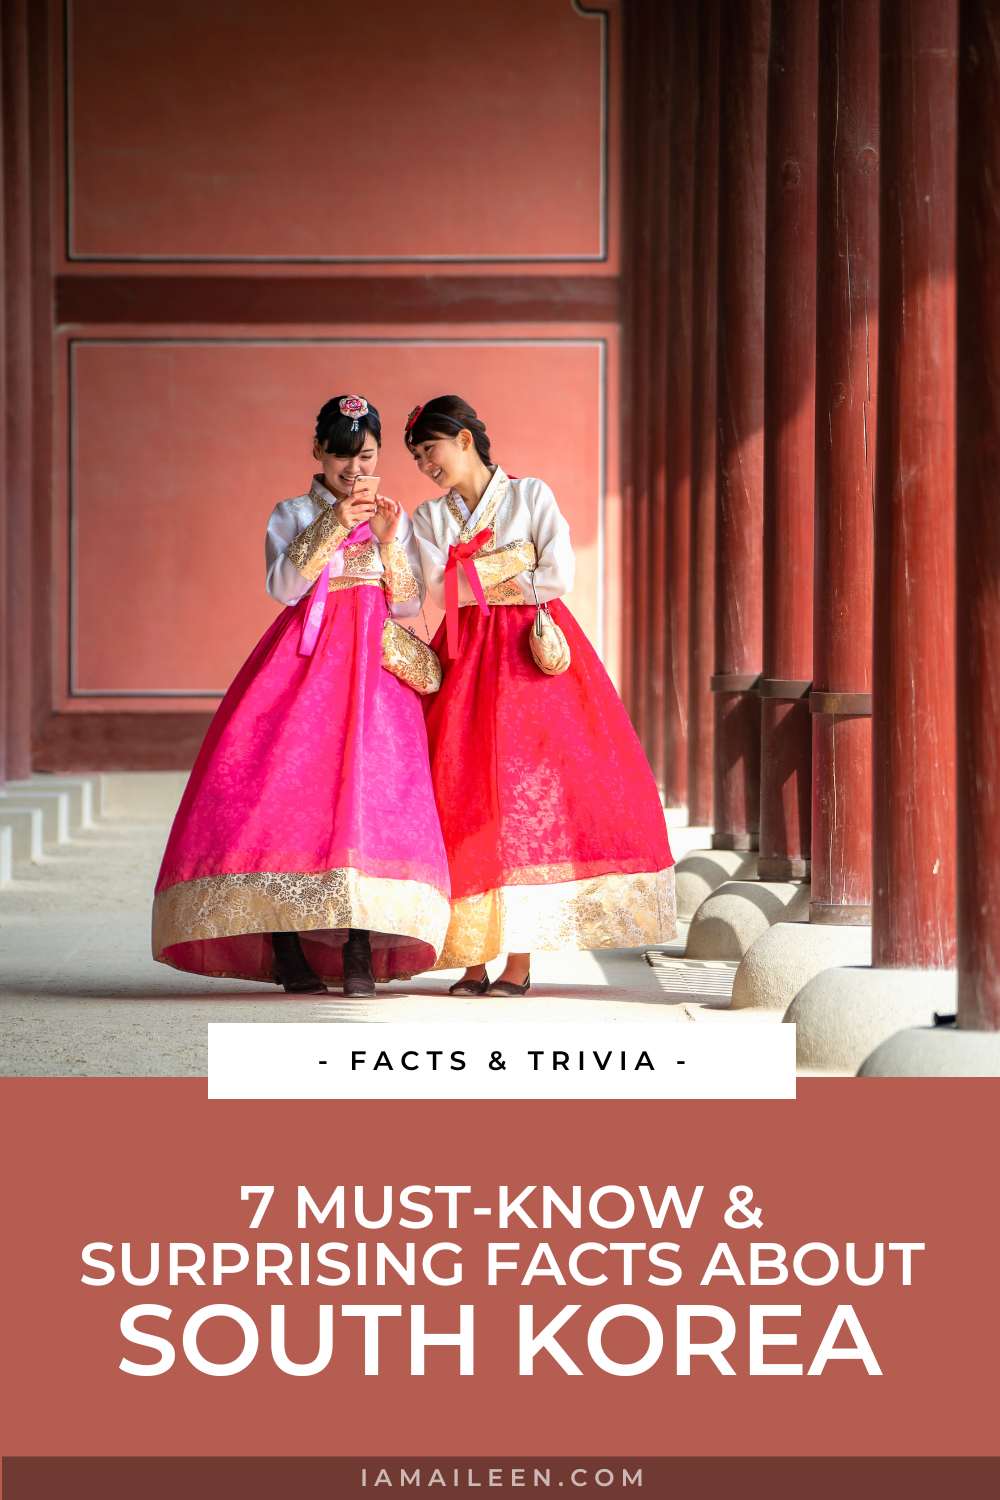 7 Must-Know Surprising Facts About South Korea